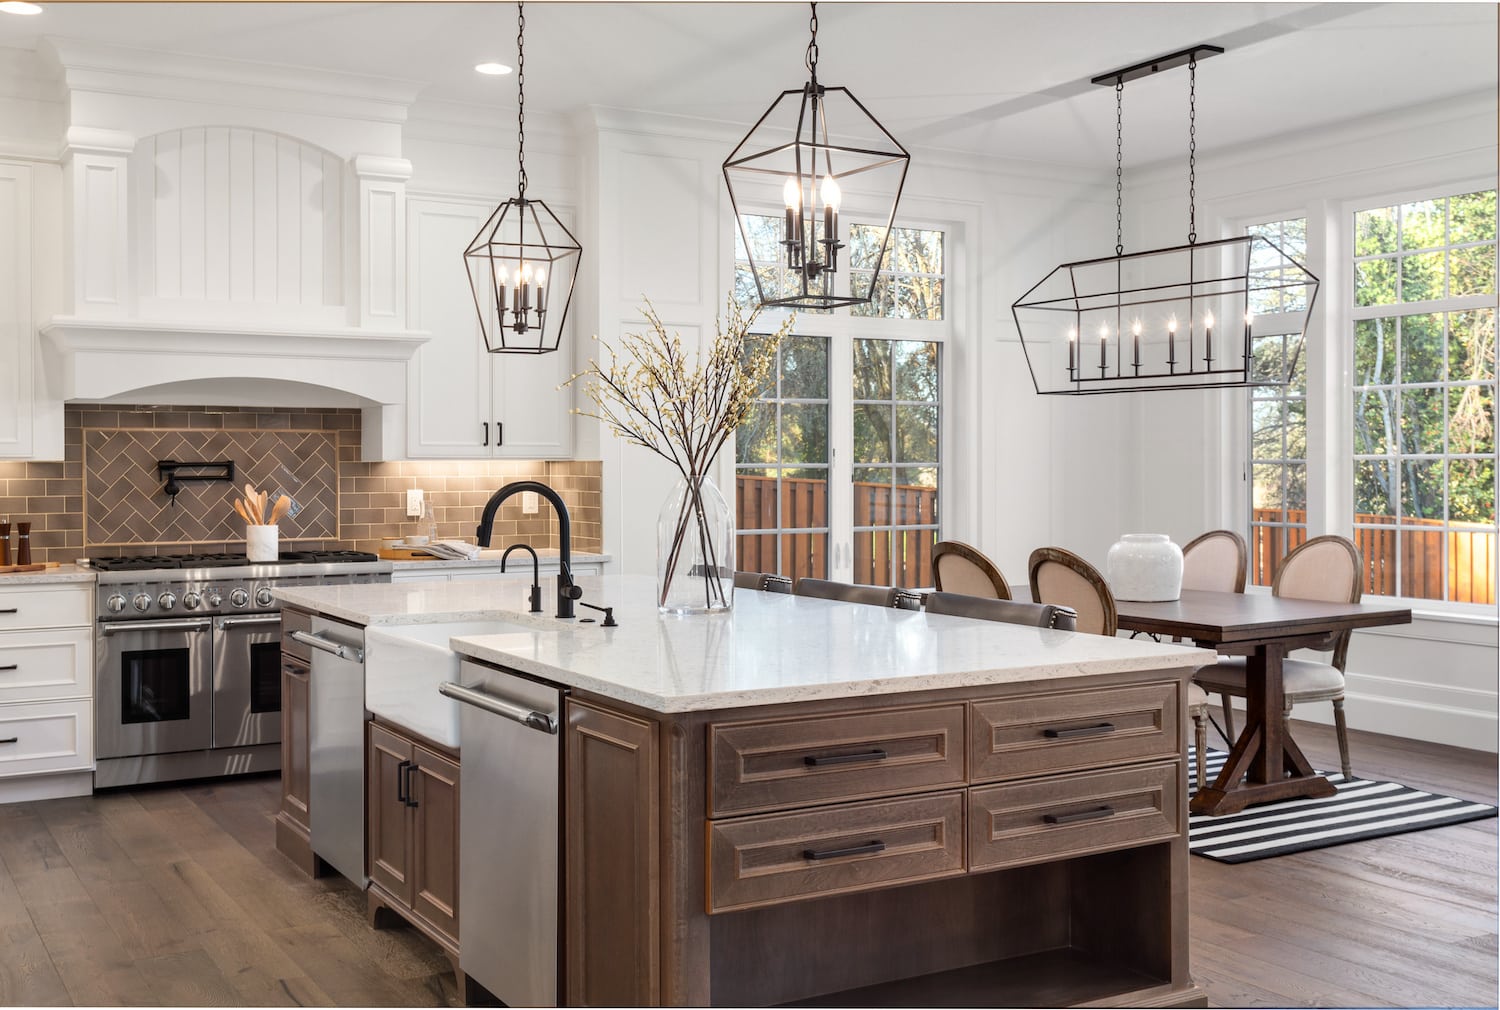 A Waukee kitchen with white cabinets and a center island.